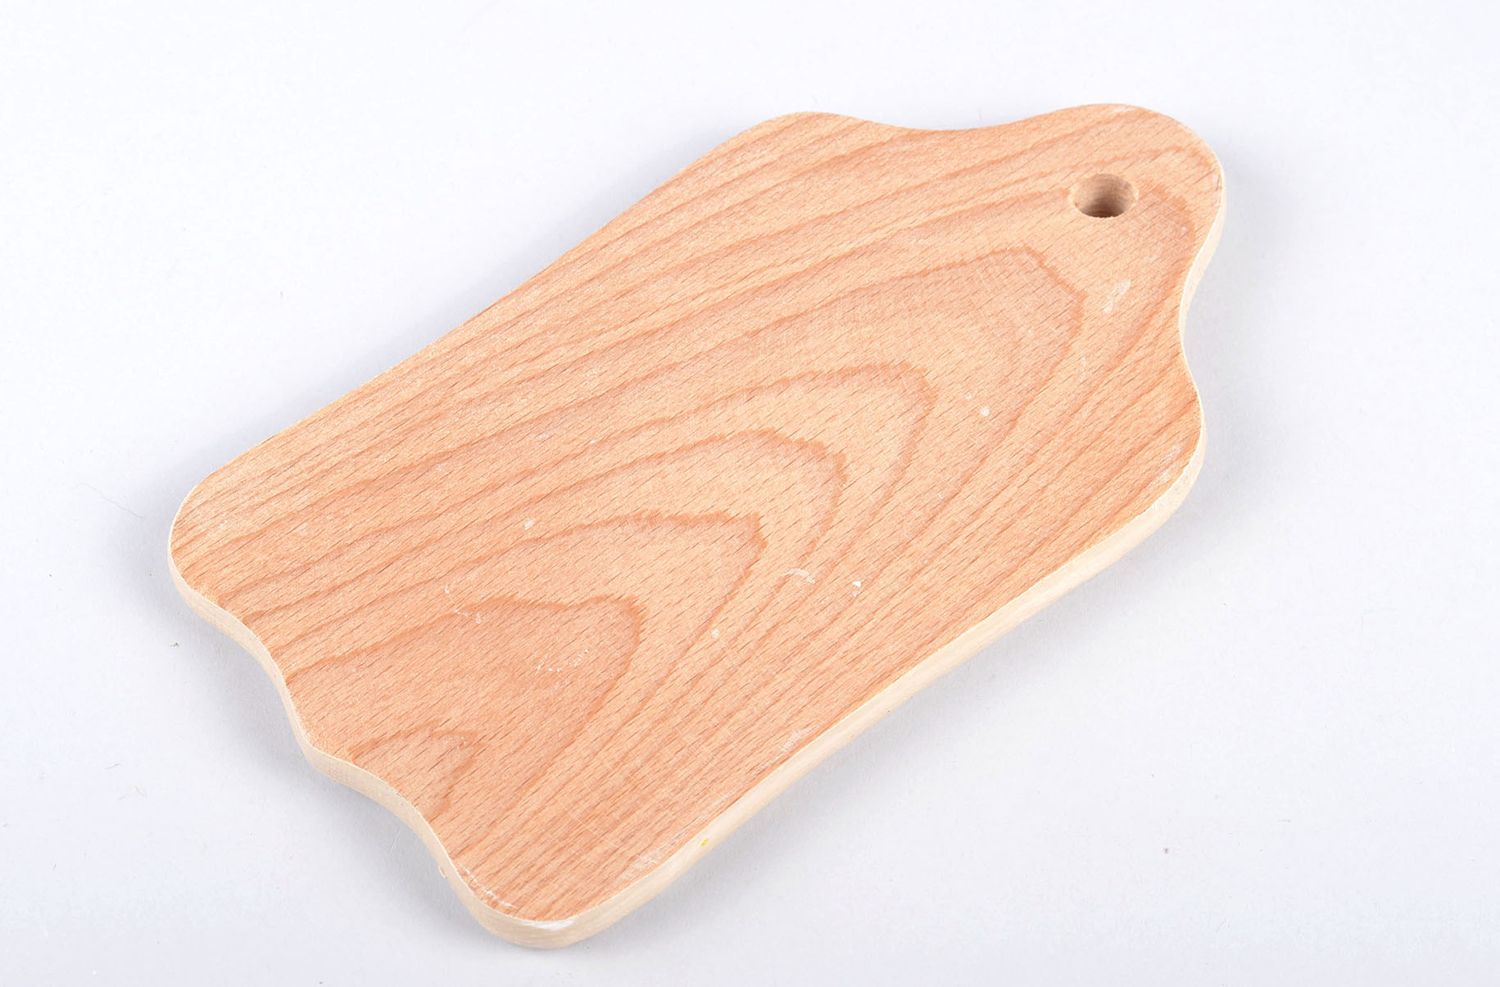 Homemade decorations wooden cutting board chopping board for decorative use only photo 2